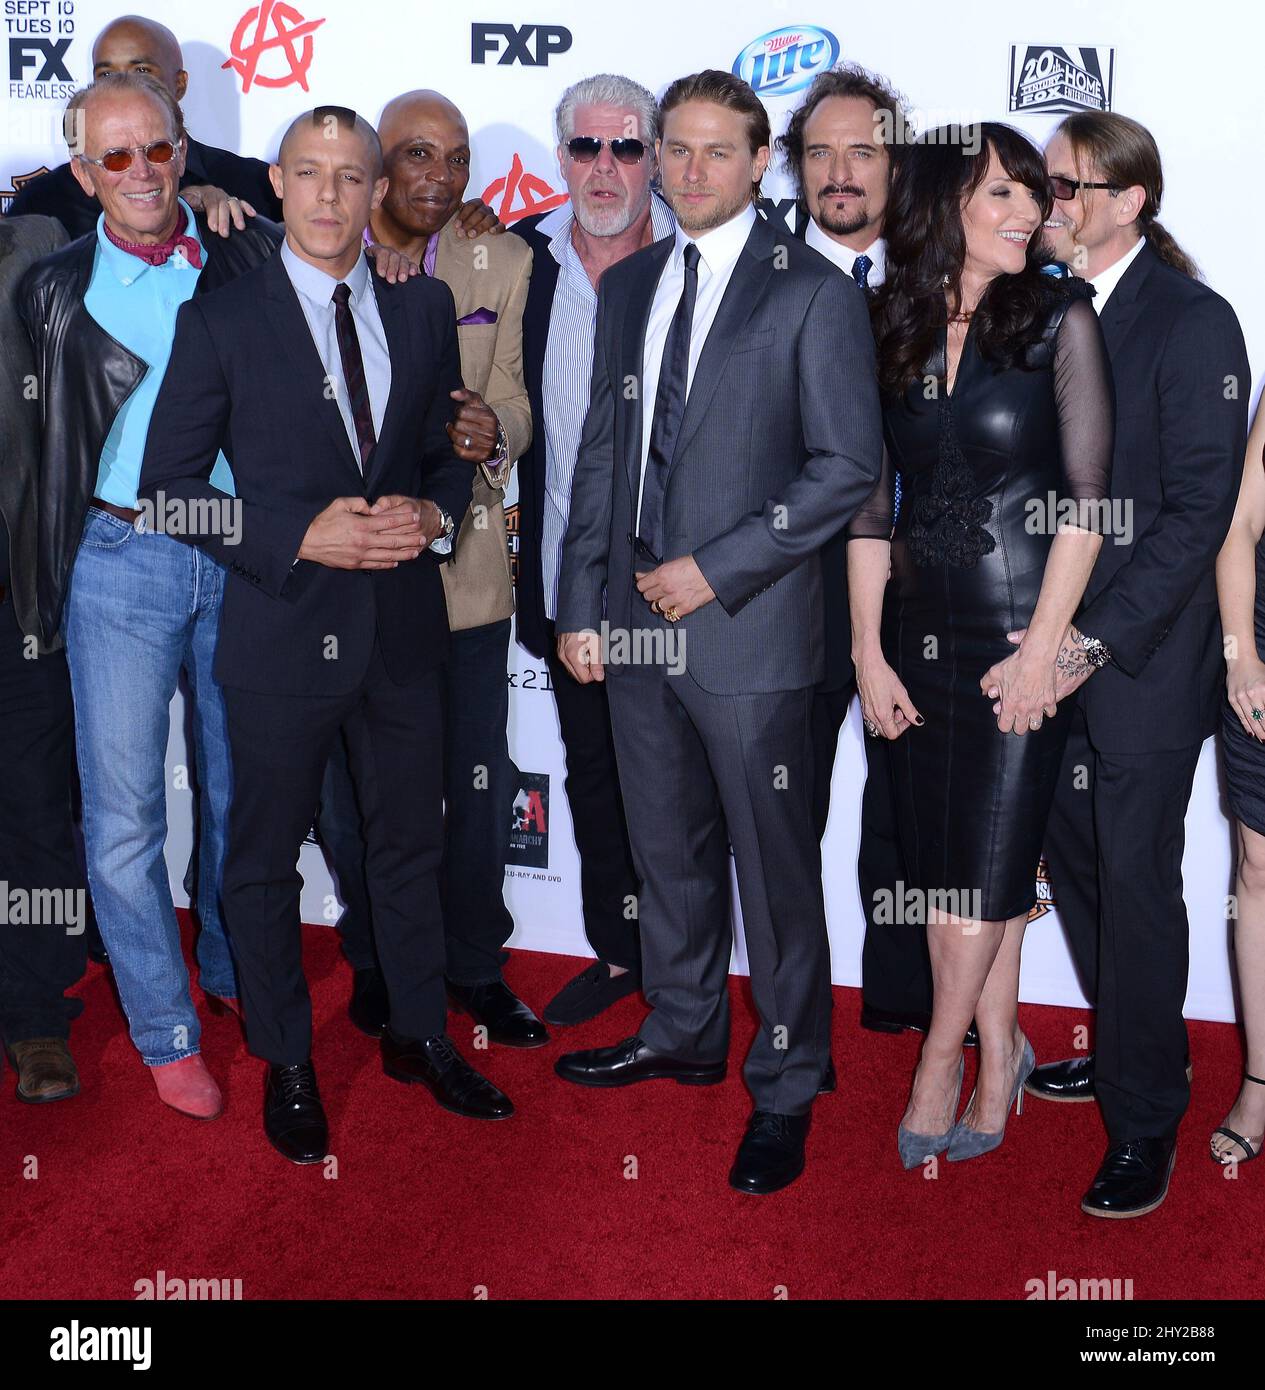 Charlie Hunnam, Sons of Anarchy Cast attends the 'Sons Of Anarchy' Season 6 Premiere Screening held at Dolby Theatre, Los Angeles. Stock Photo